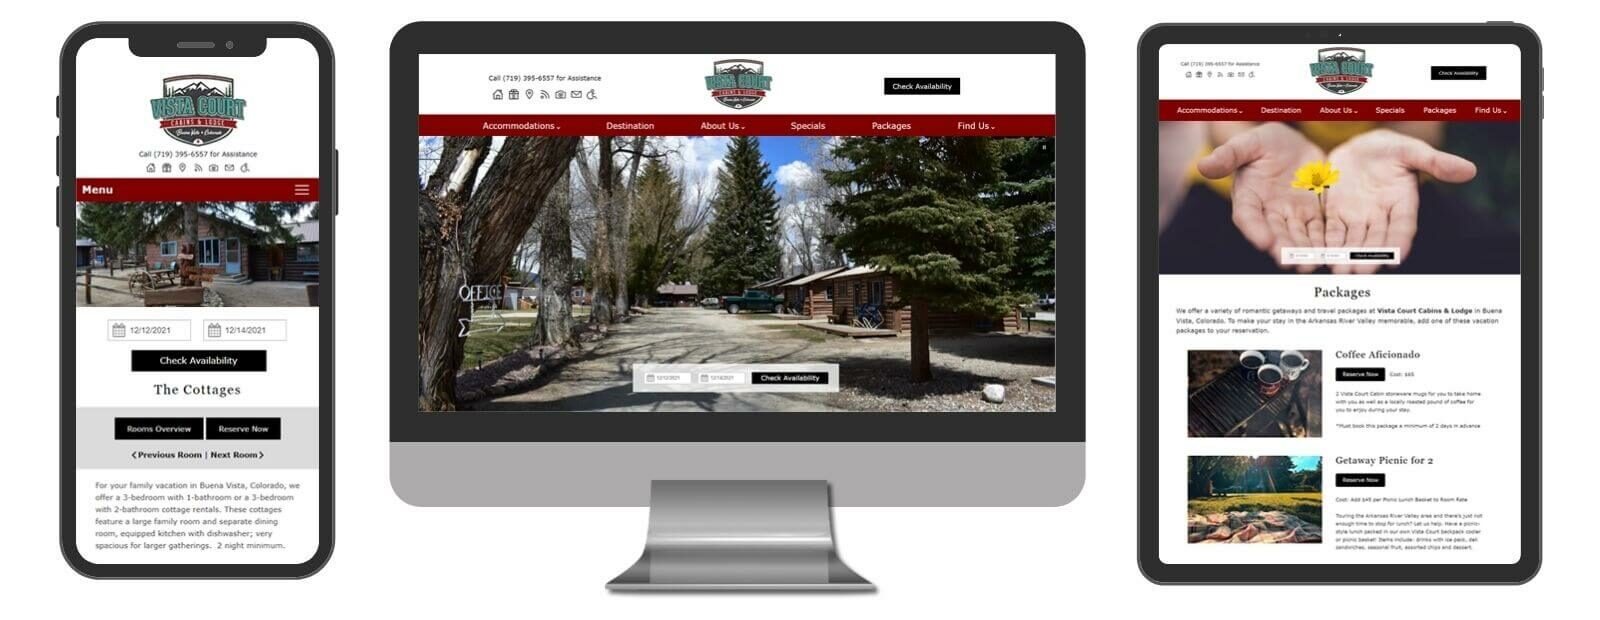 Vista Court Cabins & Lodge website displayed in 3 sizes - mobile, template and desktop